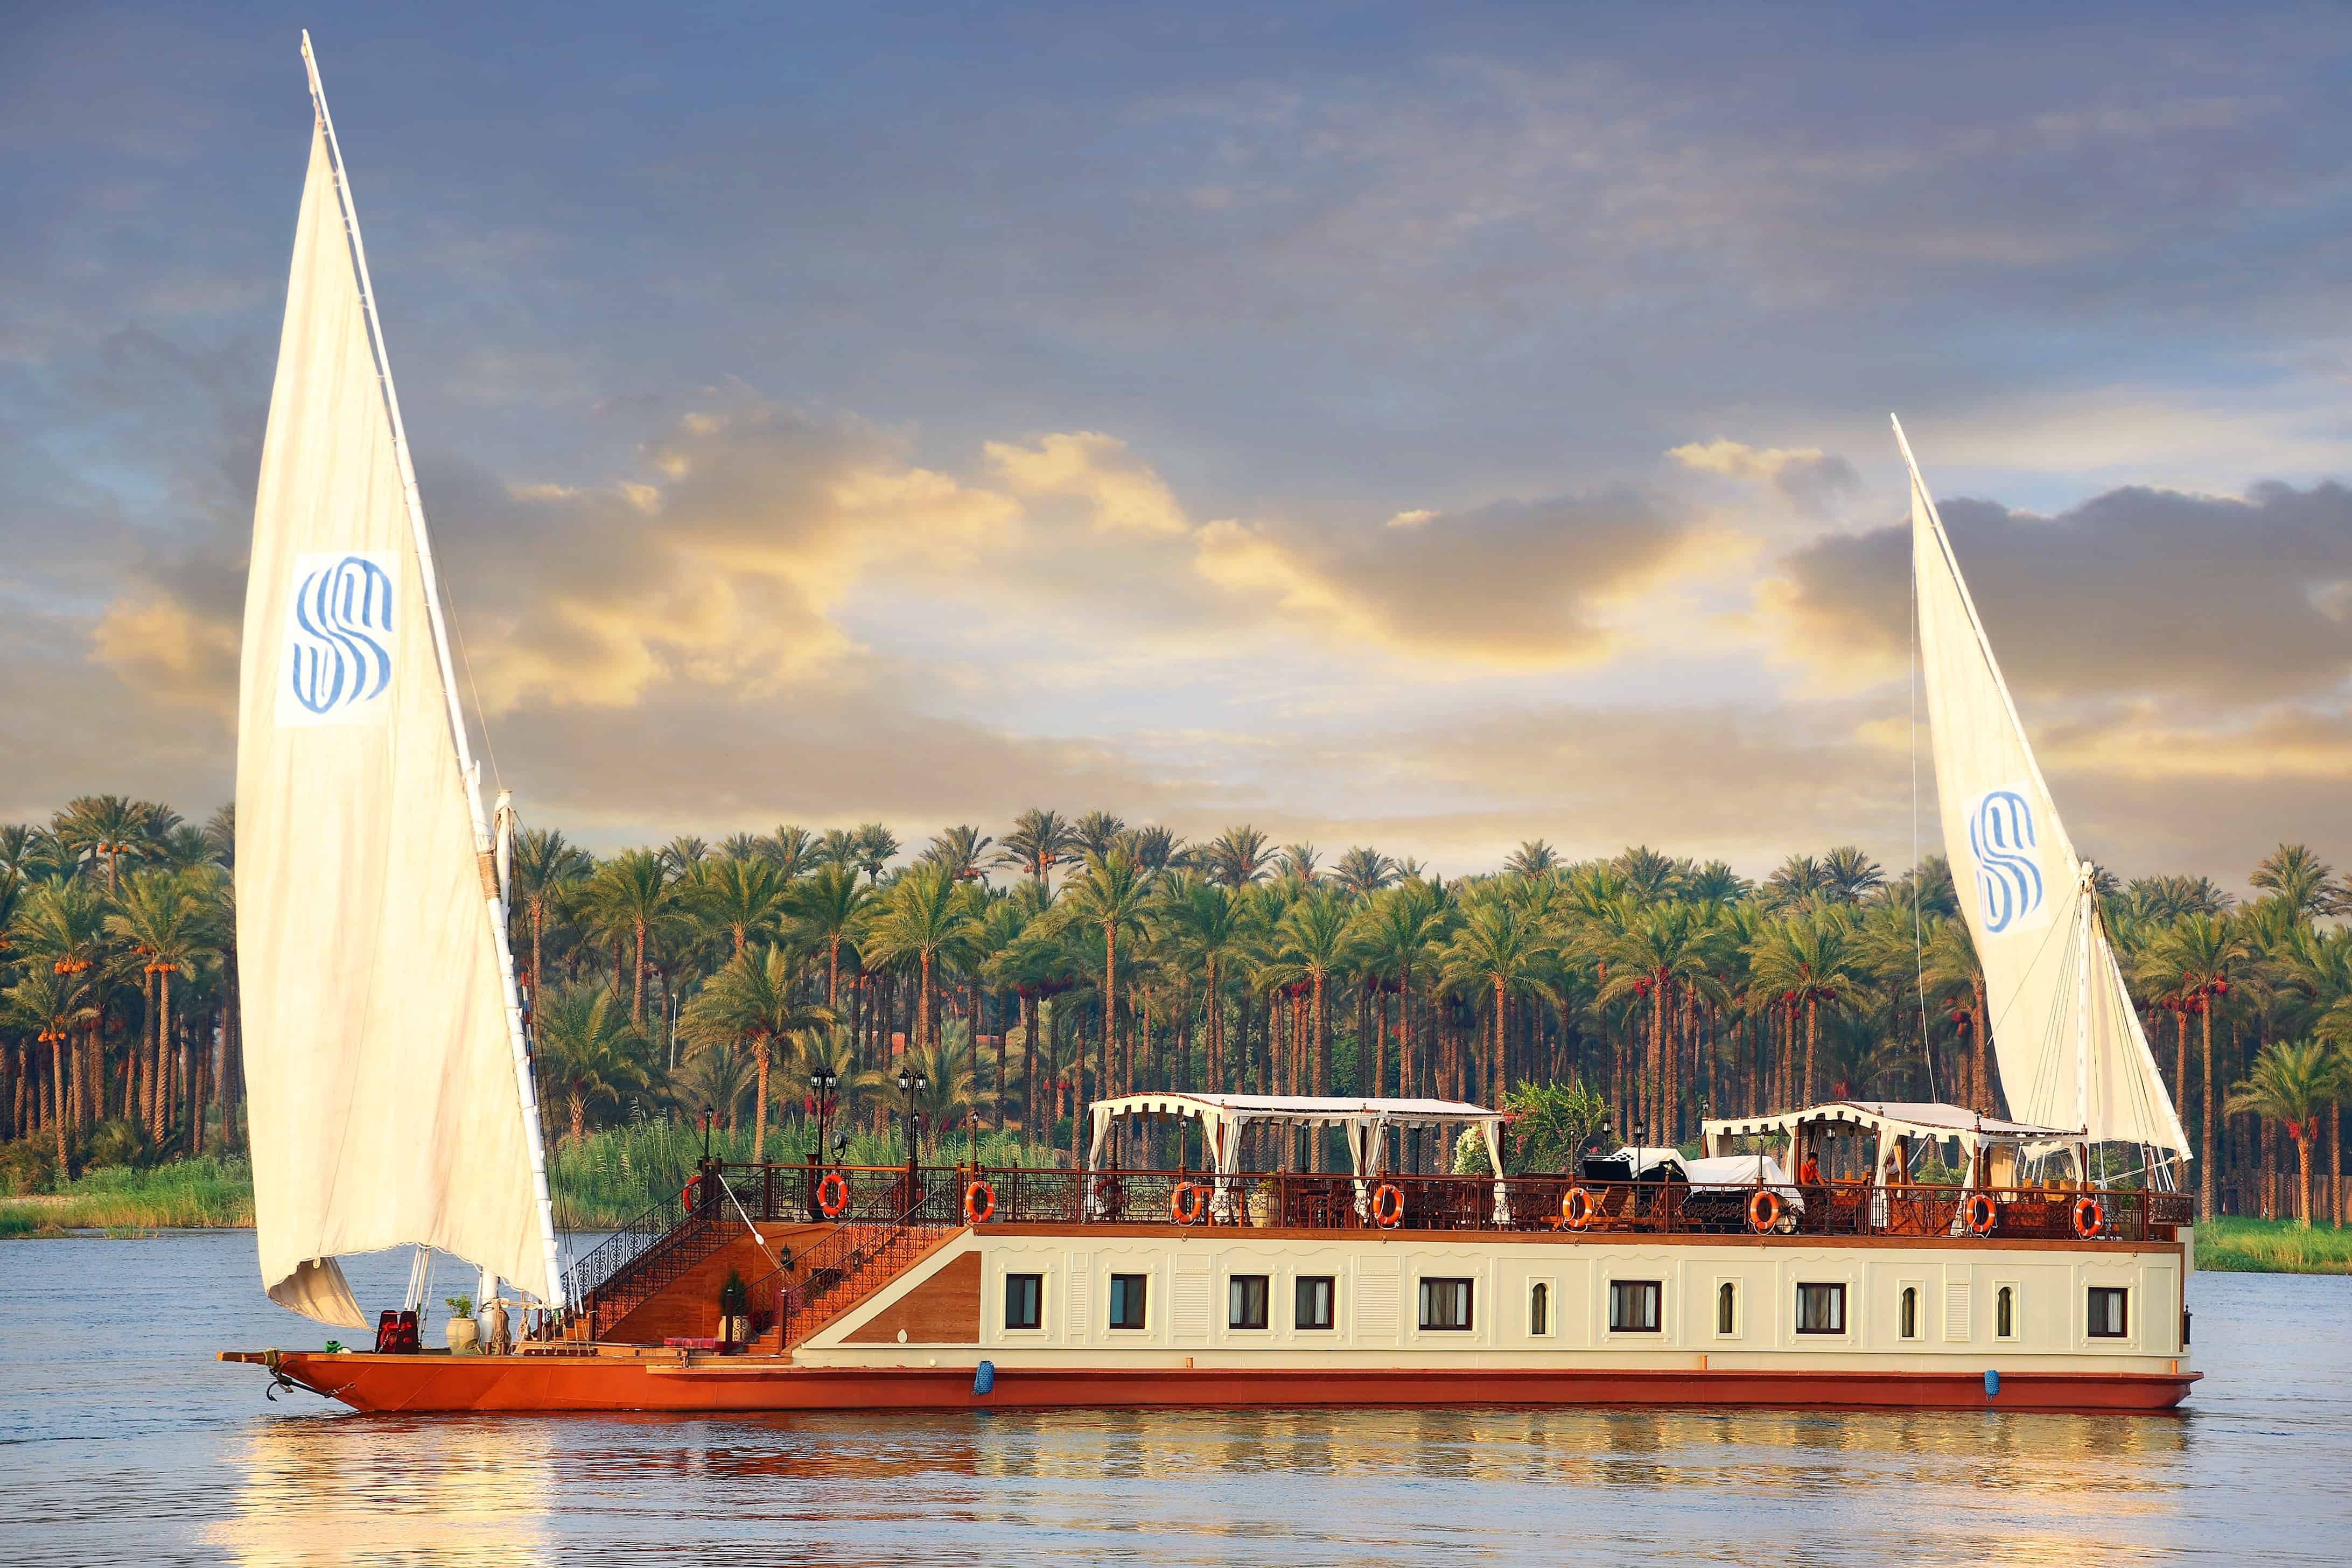 river nile cruise excursions